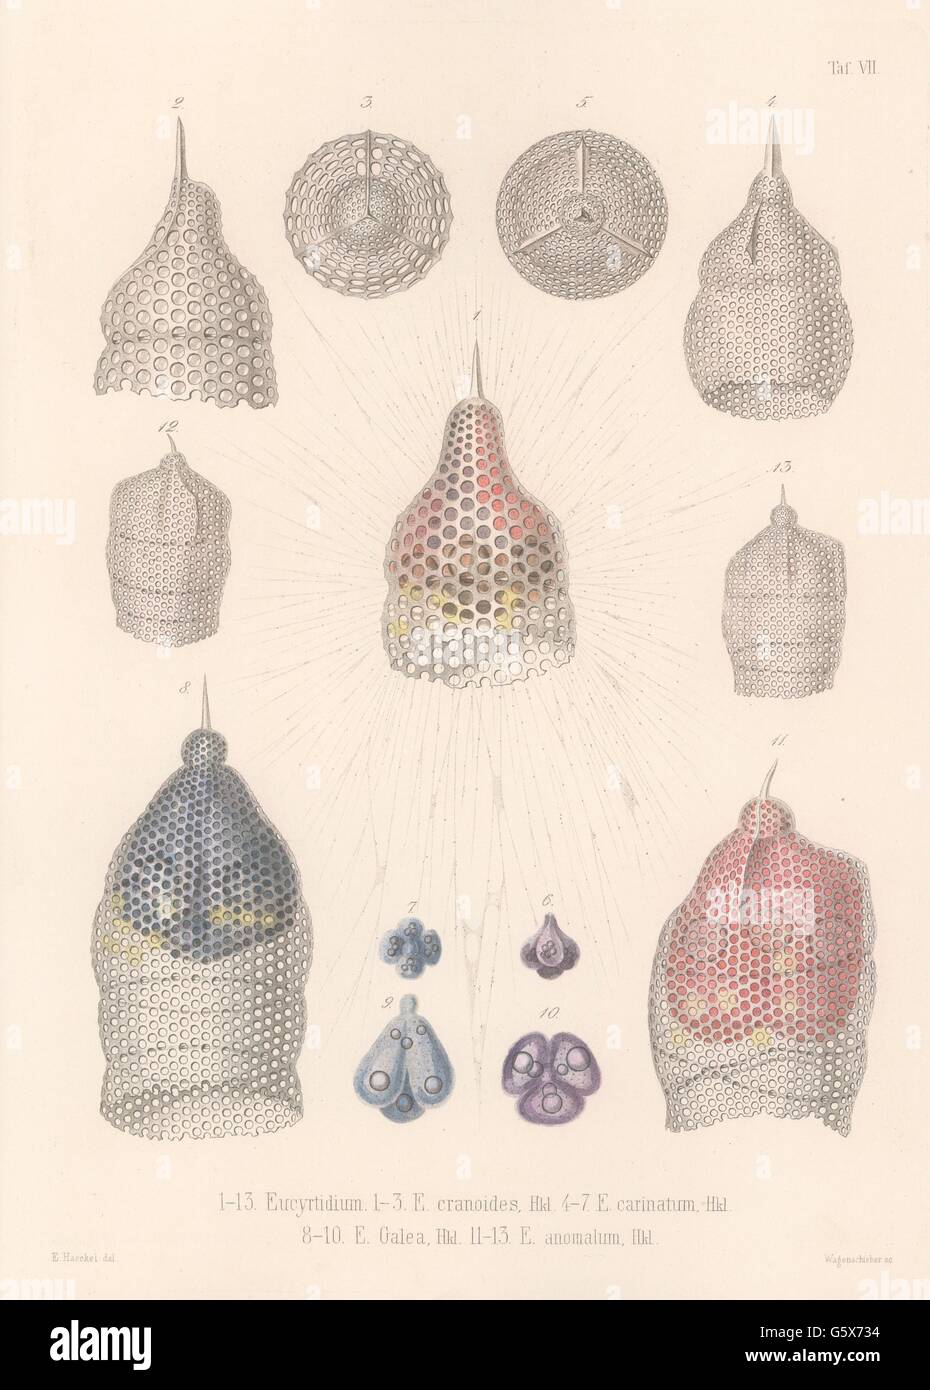 zoology / animals, radiolarian (Radiolaria), 1-3 Eucrytidium cranoides, 4-7 Eucrytidium carinatum, 8-10 Eucrytidium galea, 11-13 Eucrytidium anomalum, colour lithograph, out of: Ernst Haeckel, 'Die Radiolarien (Rhizopeda radiata)', Band 2, Berlin, 1862, Additional-Rights-Clearences-Not Available Stock Photo